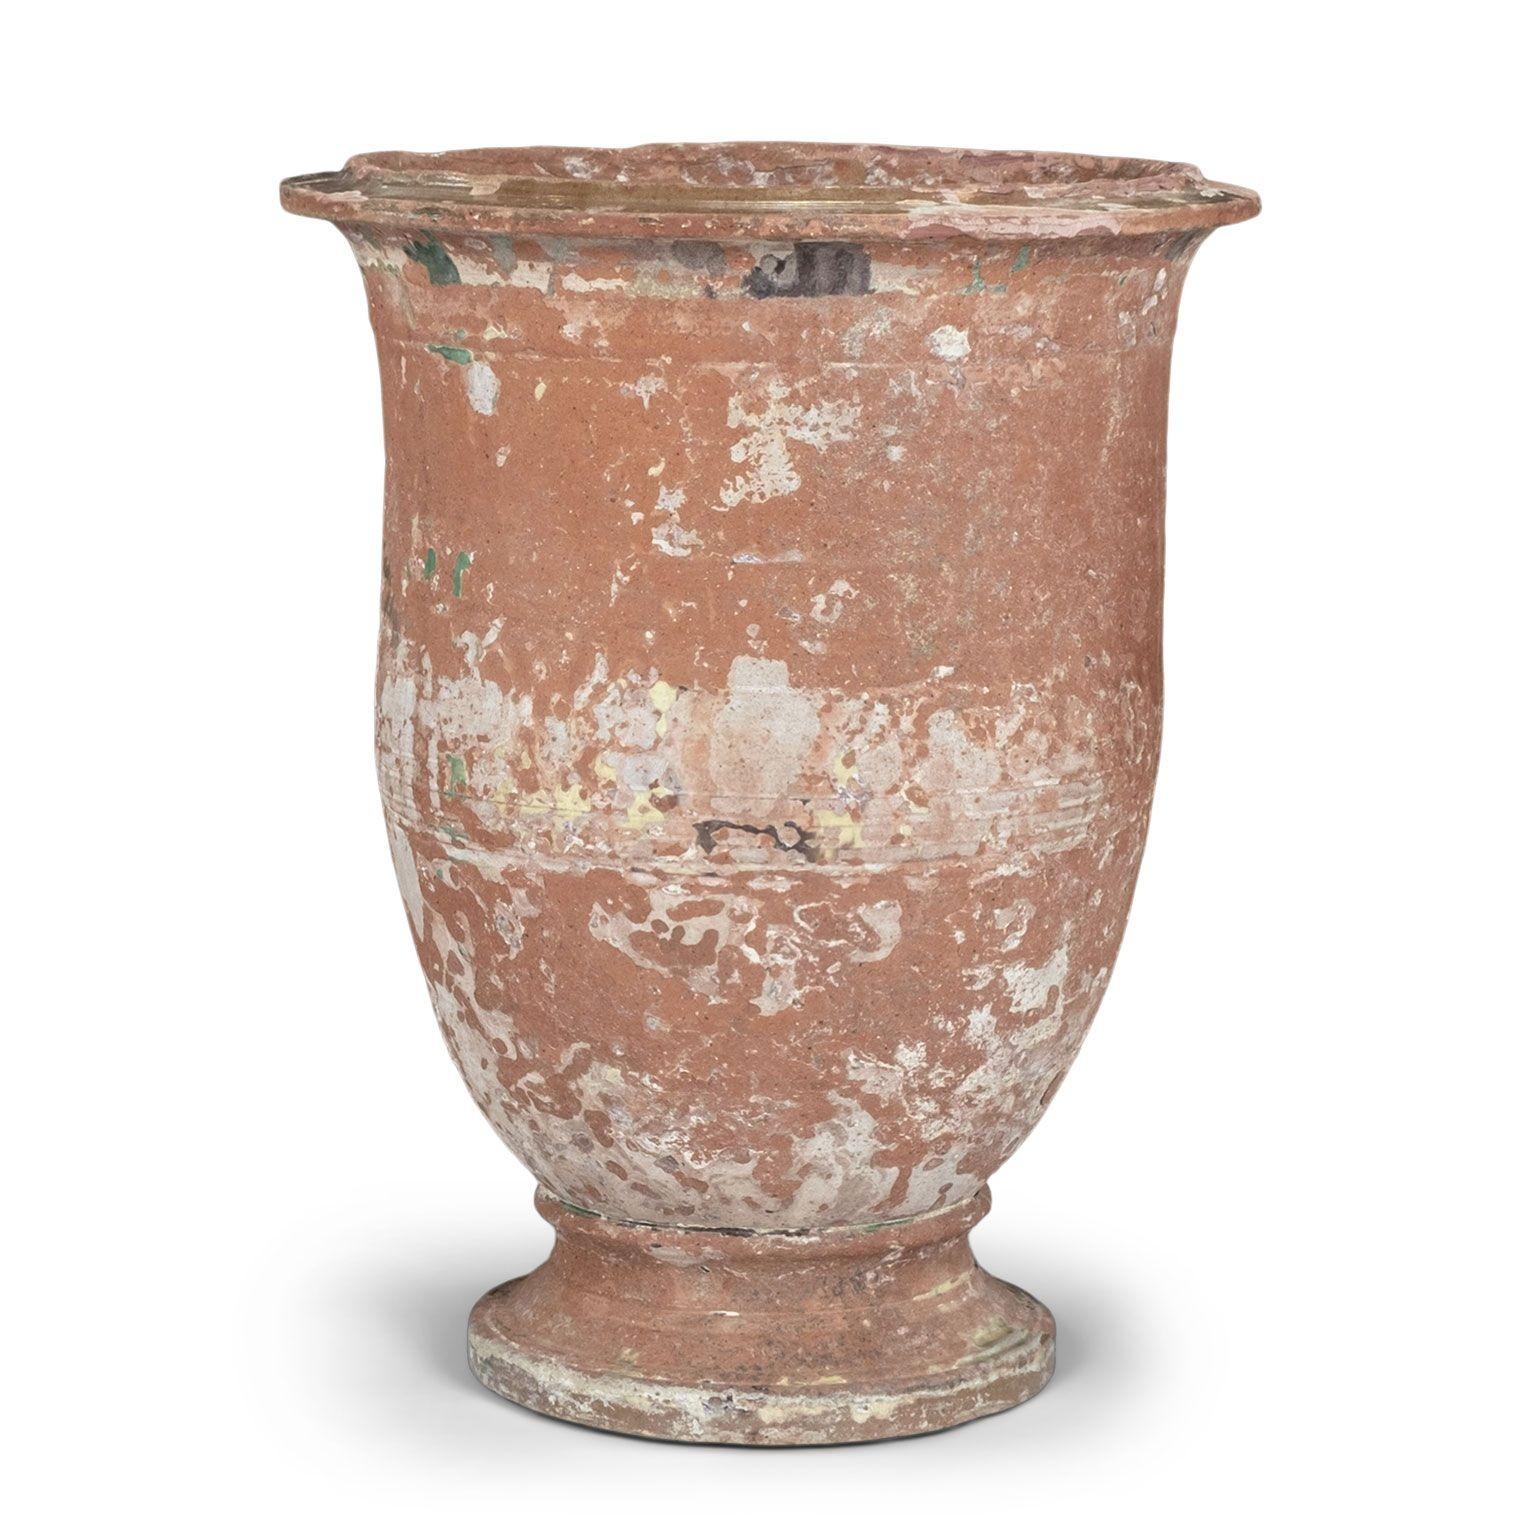 Mid-19th century Anduze Jar retaining remnants of green glaze. A second similar Anduze jar is available that varies slightly in size (see last two images). The two together make an excellent near-pair that are equally suitable indoor or outside, on